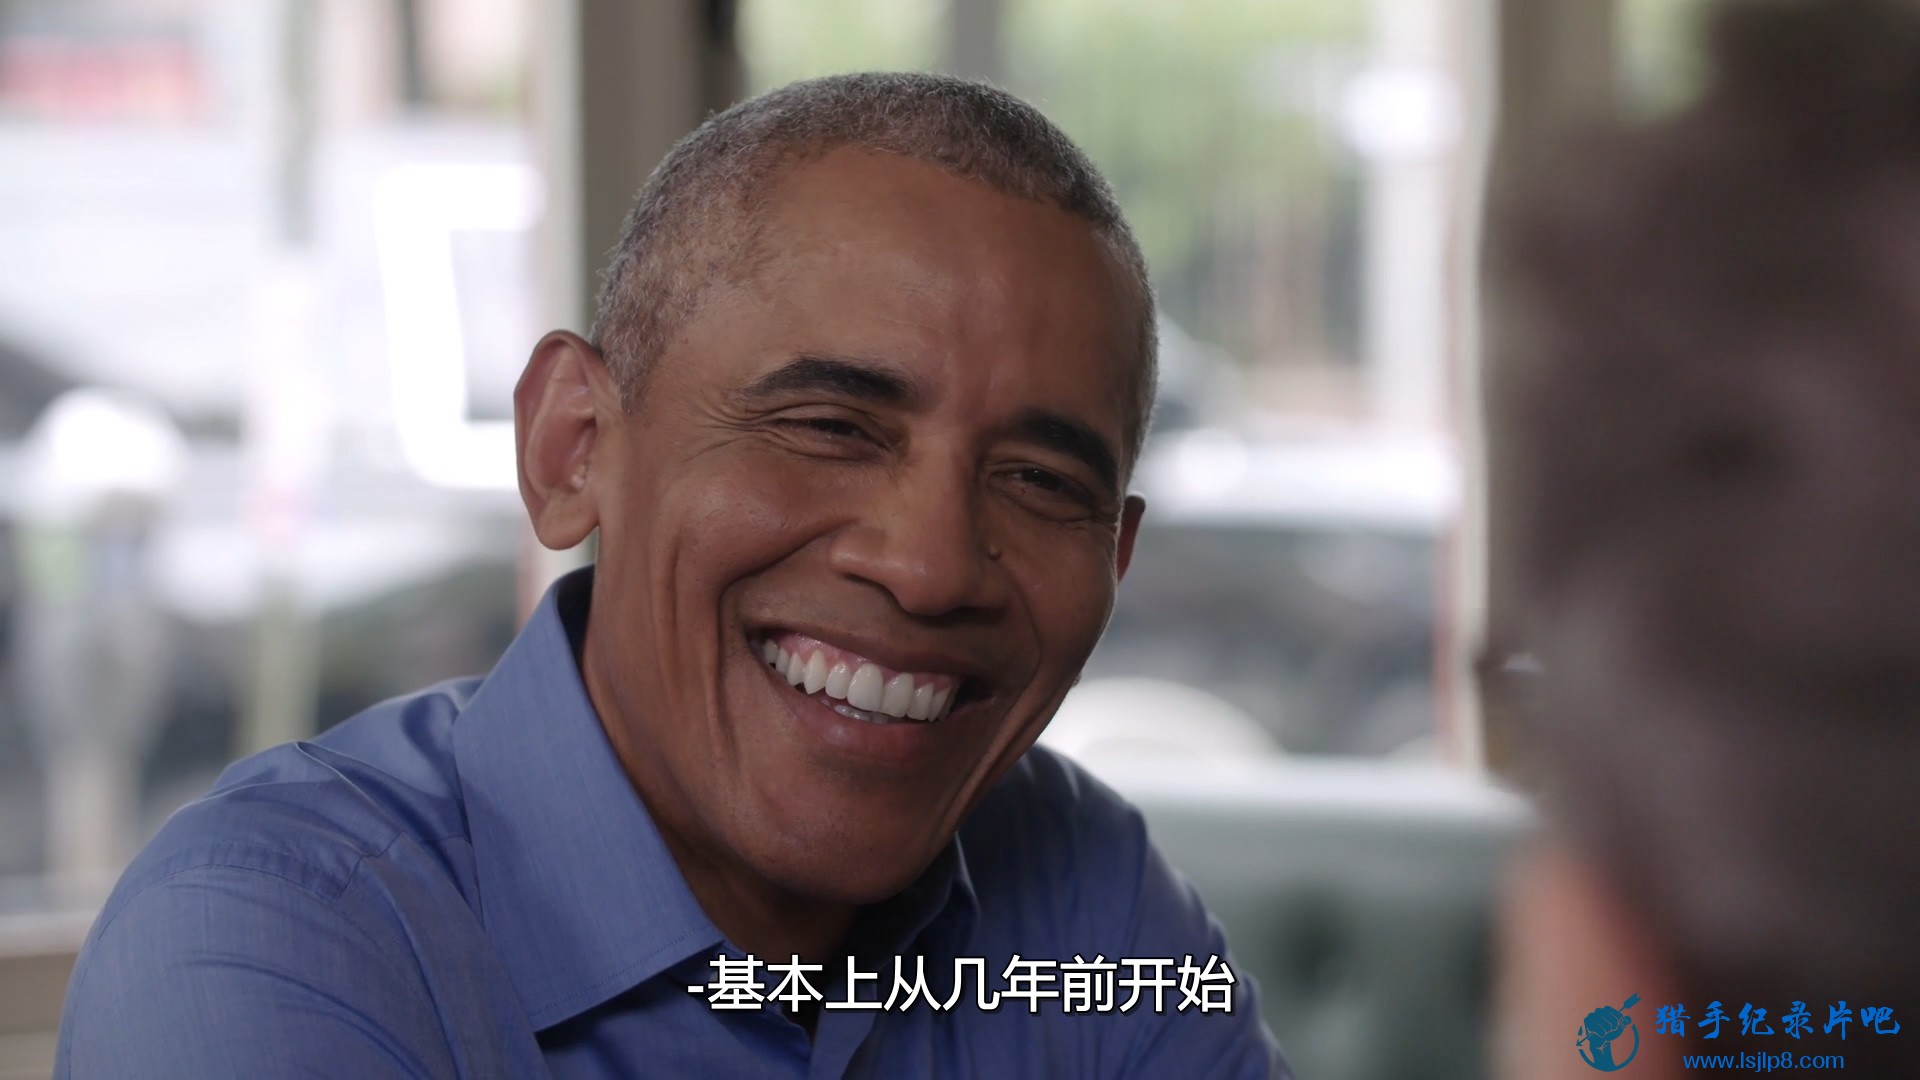 American.Factory.A.Conversation.with.the.Obamas.2019.1080p.NF.WEB-DL.DDP5.1.x264.jpg